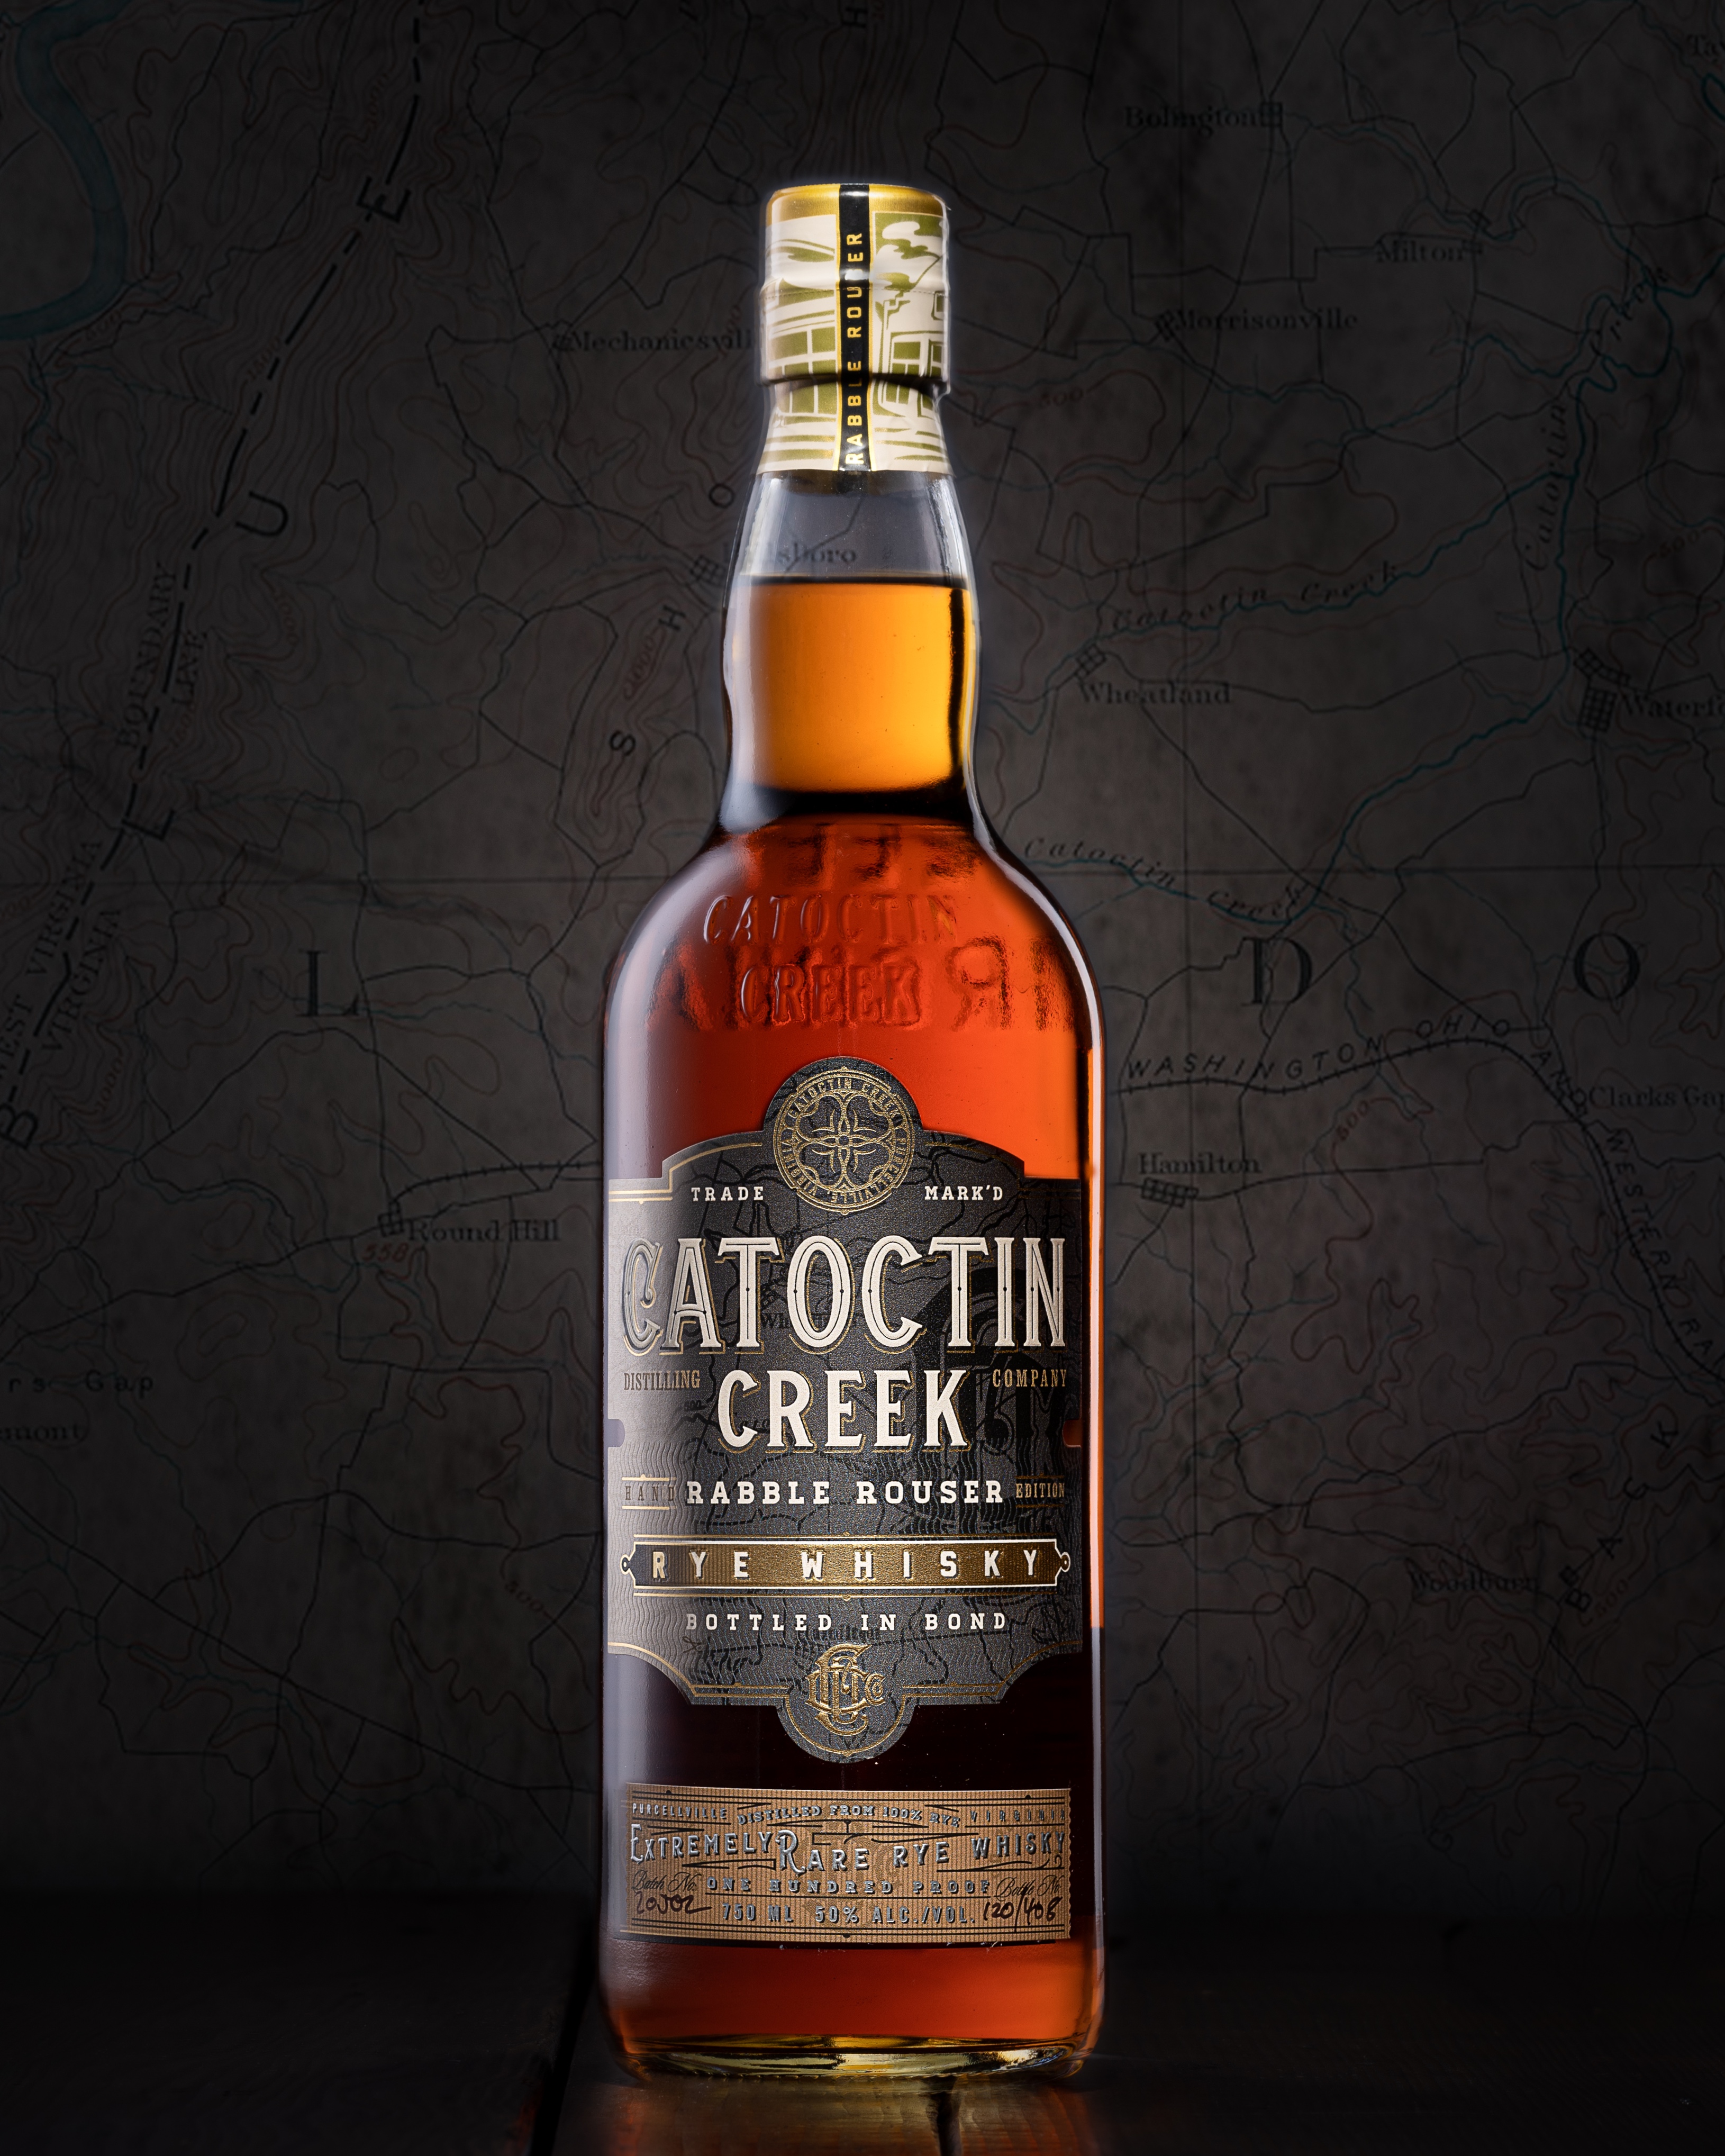 Catoctin Creek Distilling Celebrates 14 Years with New Rye Whiskey